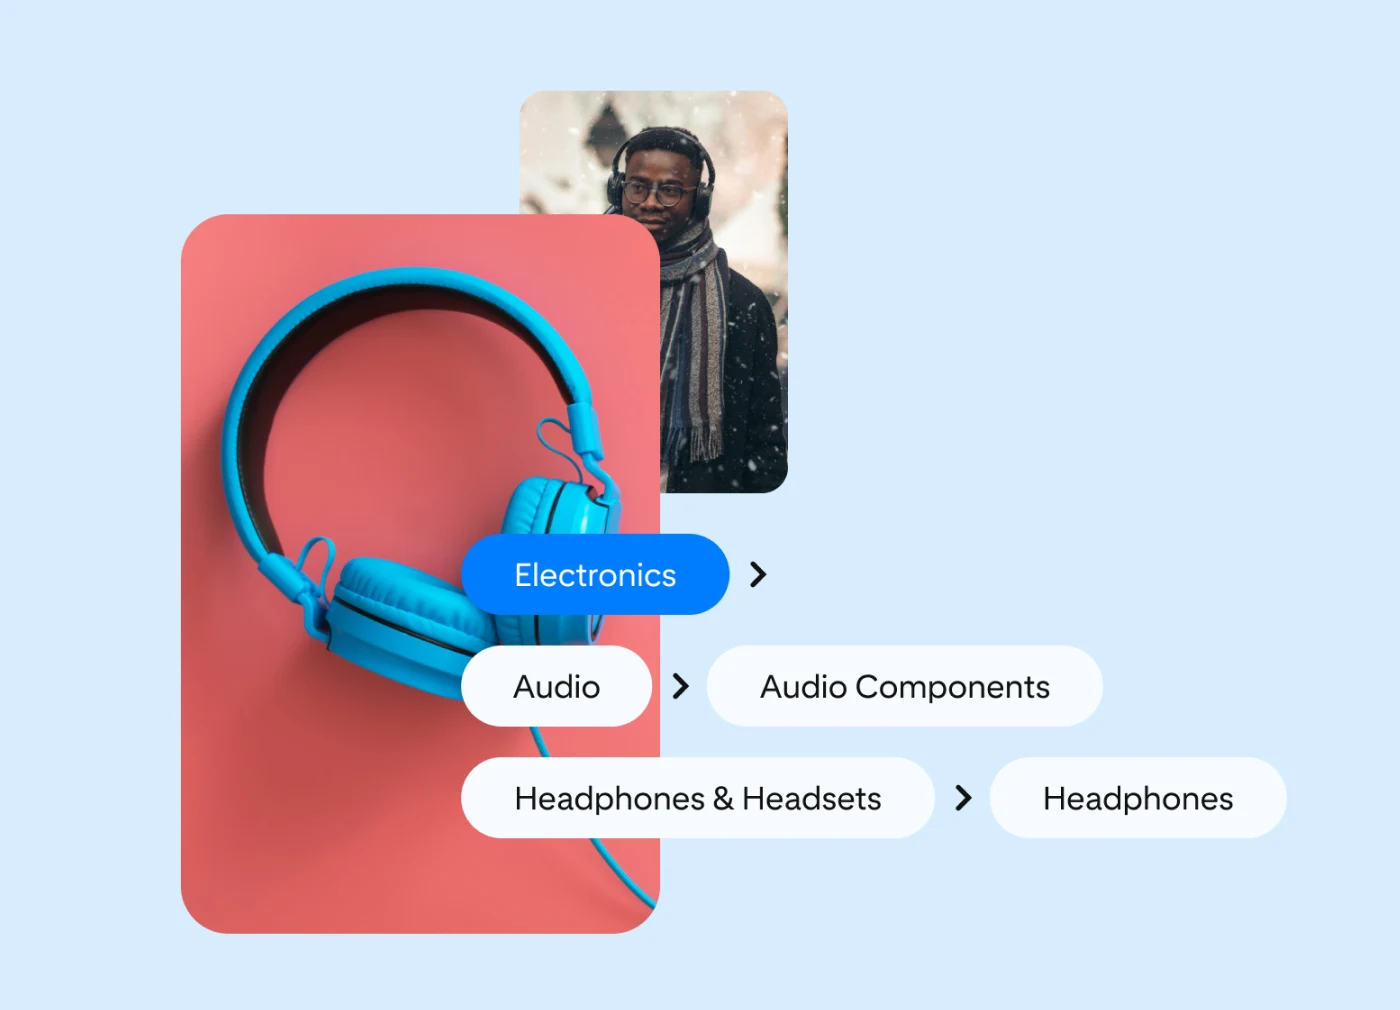 Two Pins presented in a stacked arrangement. The first Pin showcases a man wearing headphones, while the second Pin features blue headphones against a red background. Text bubbles within the image indicate the levels of product categorization.